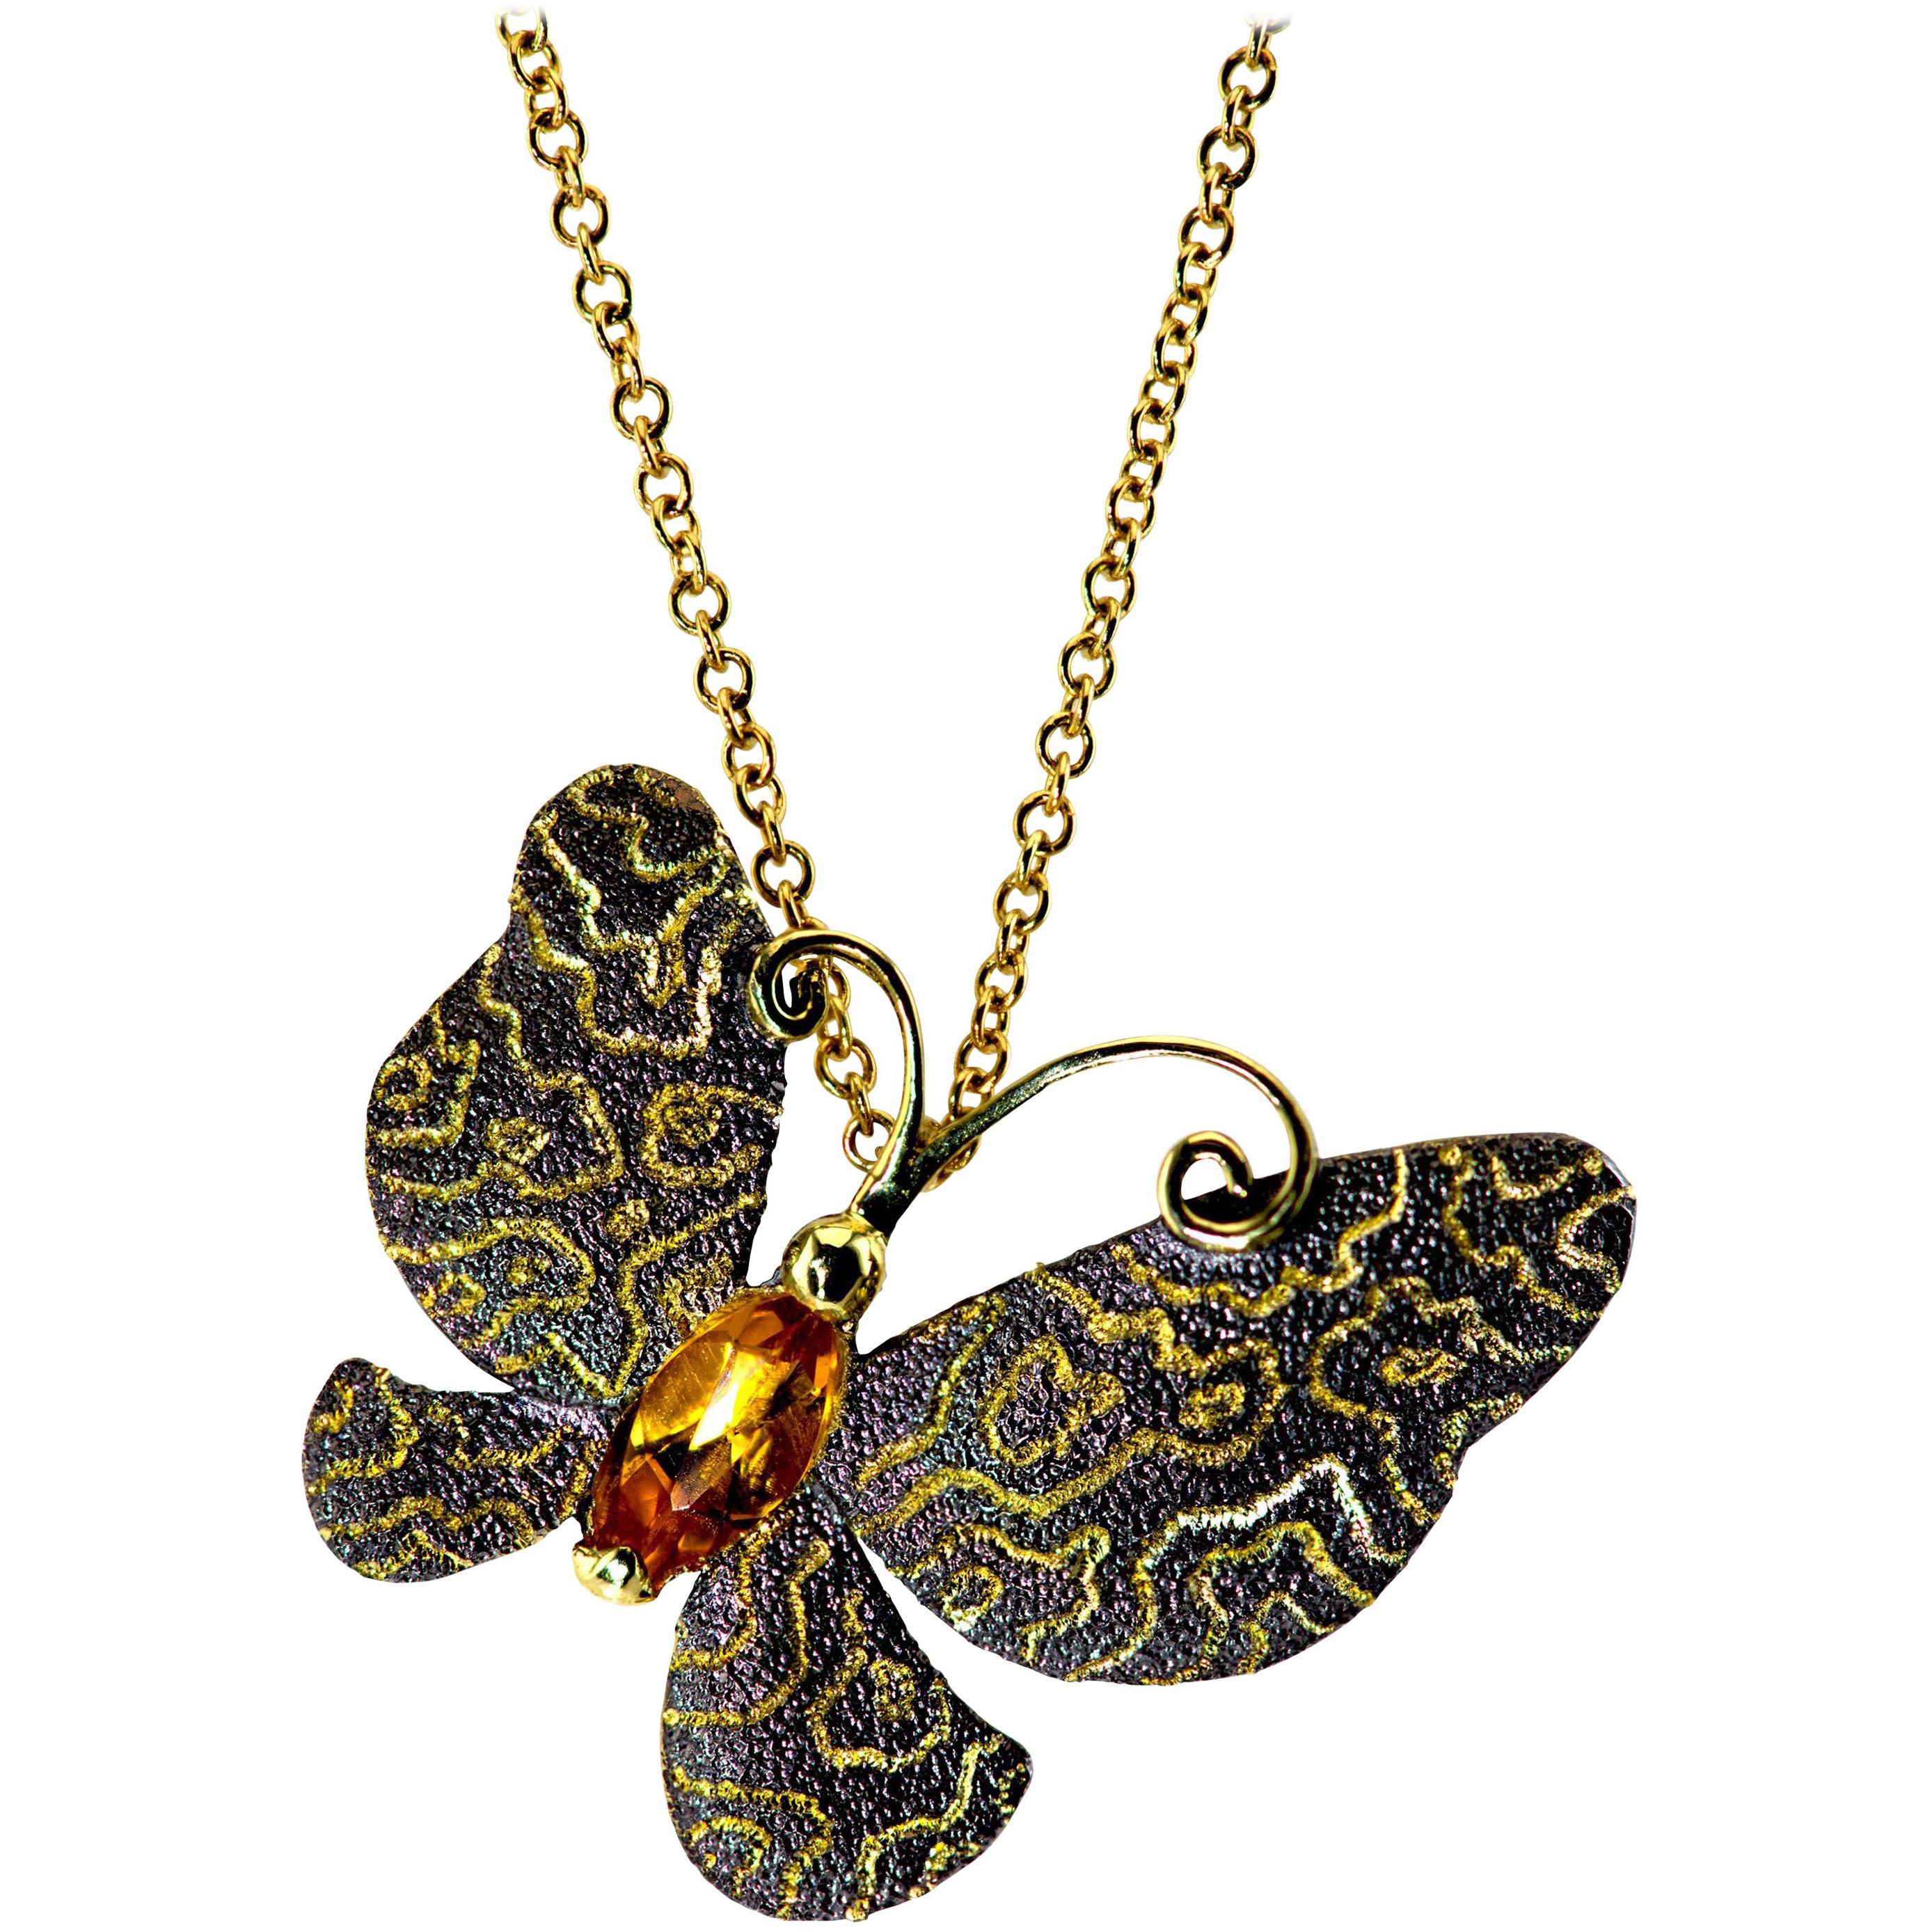 Citrine Gold Butterfly Hand-Textured Pendant Necklace Pin on Chain im Angebot